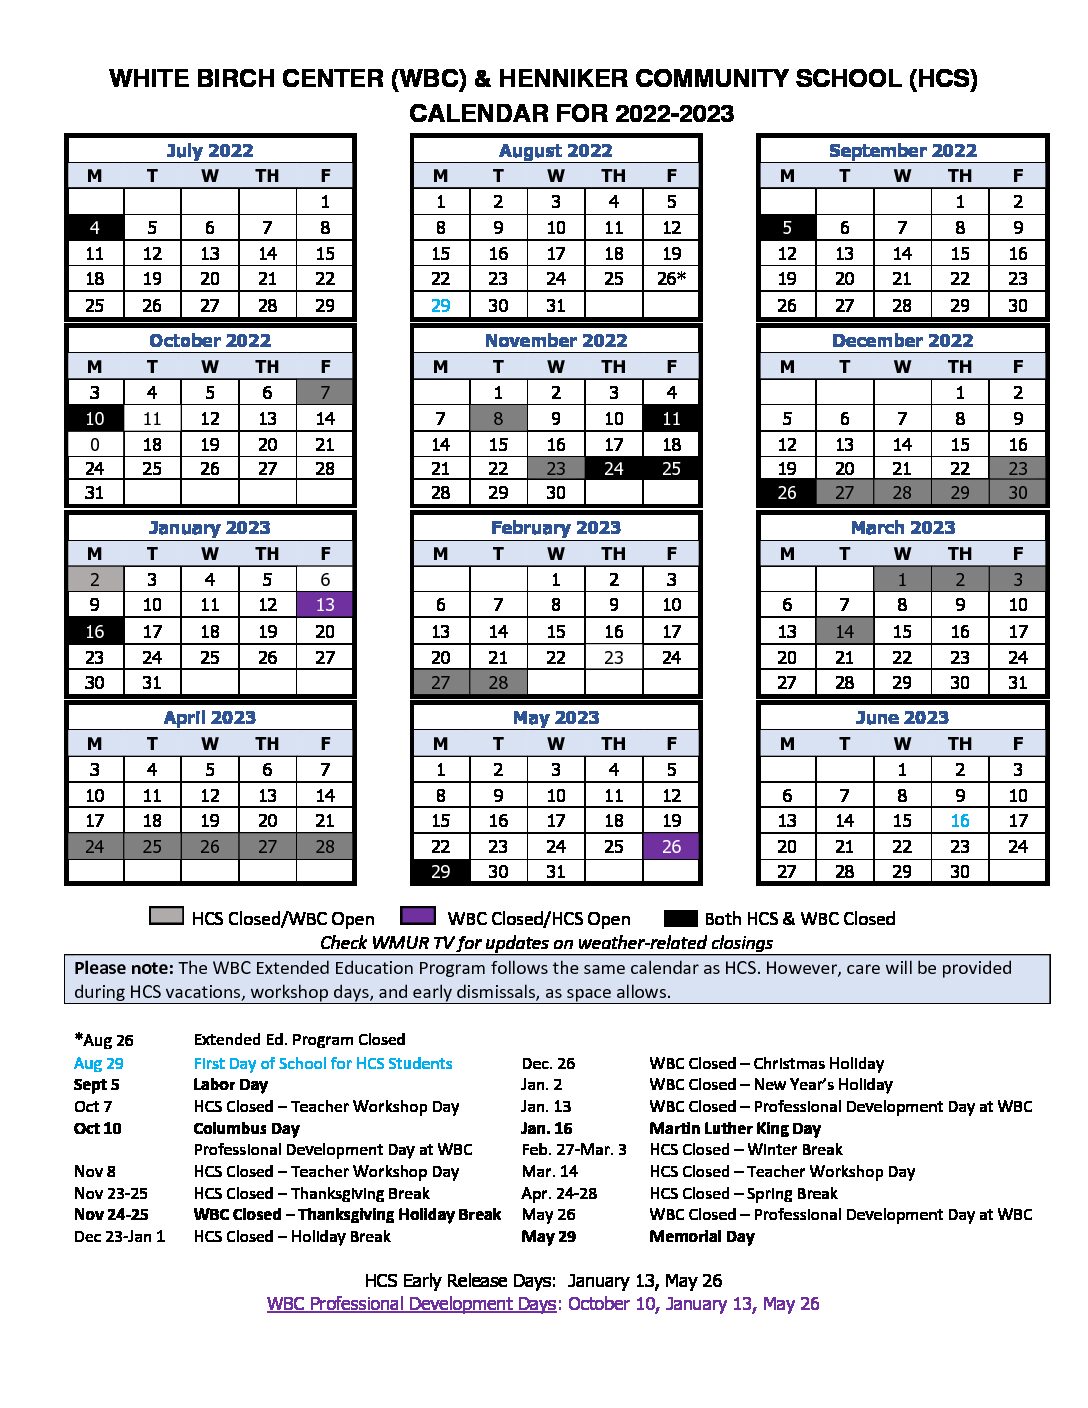 Early Learning and Extended Education Calendar - White Birch Center